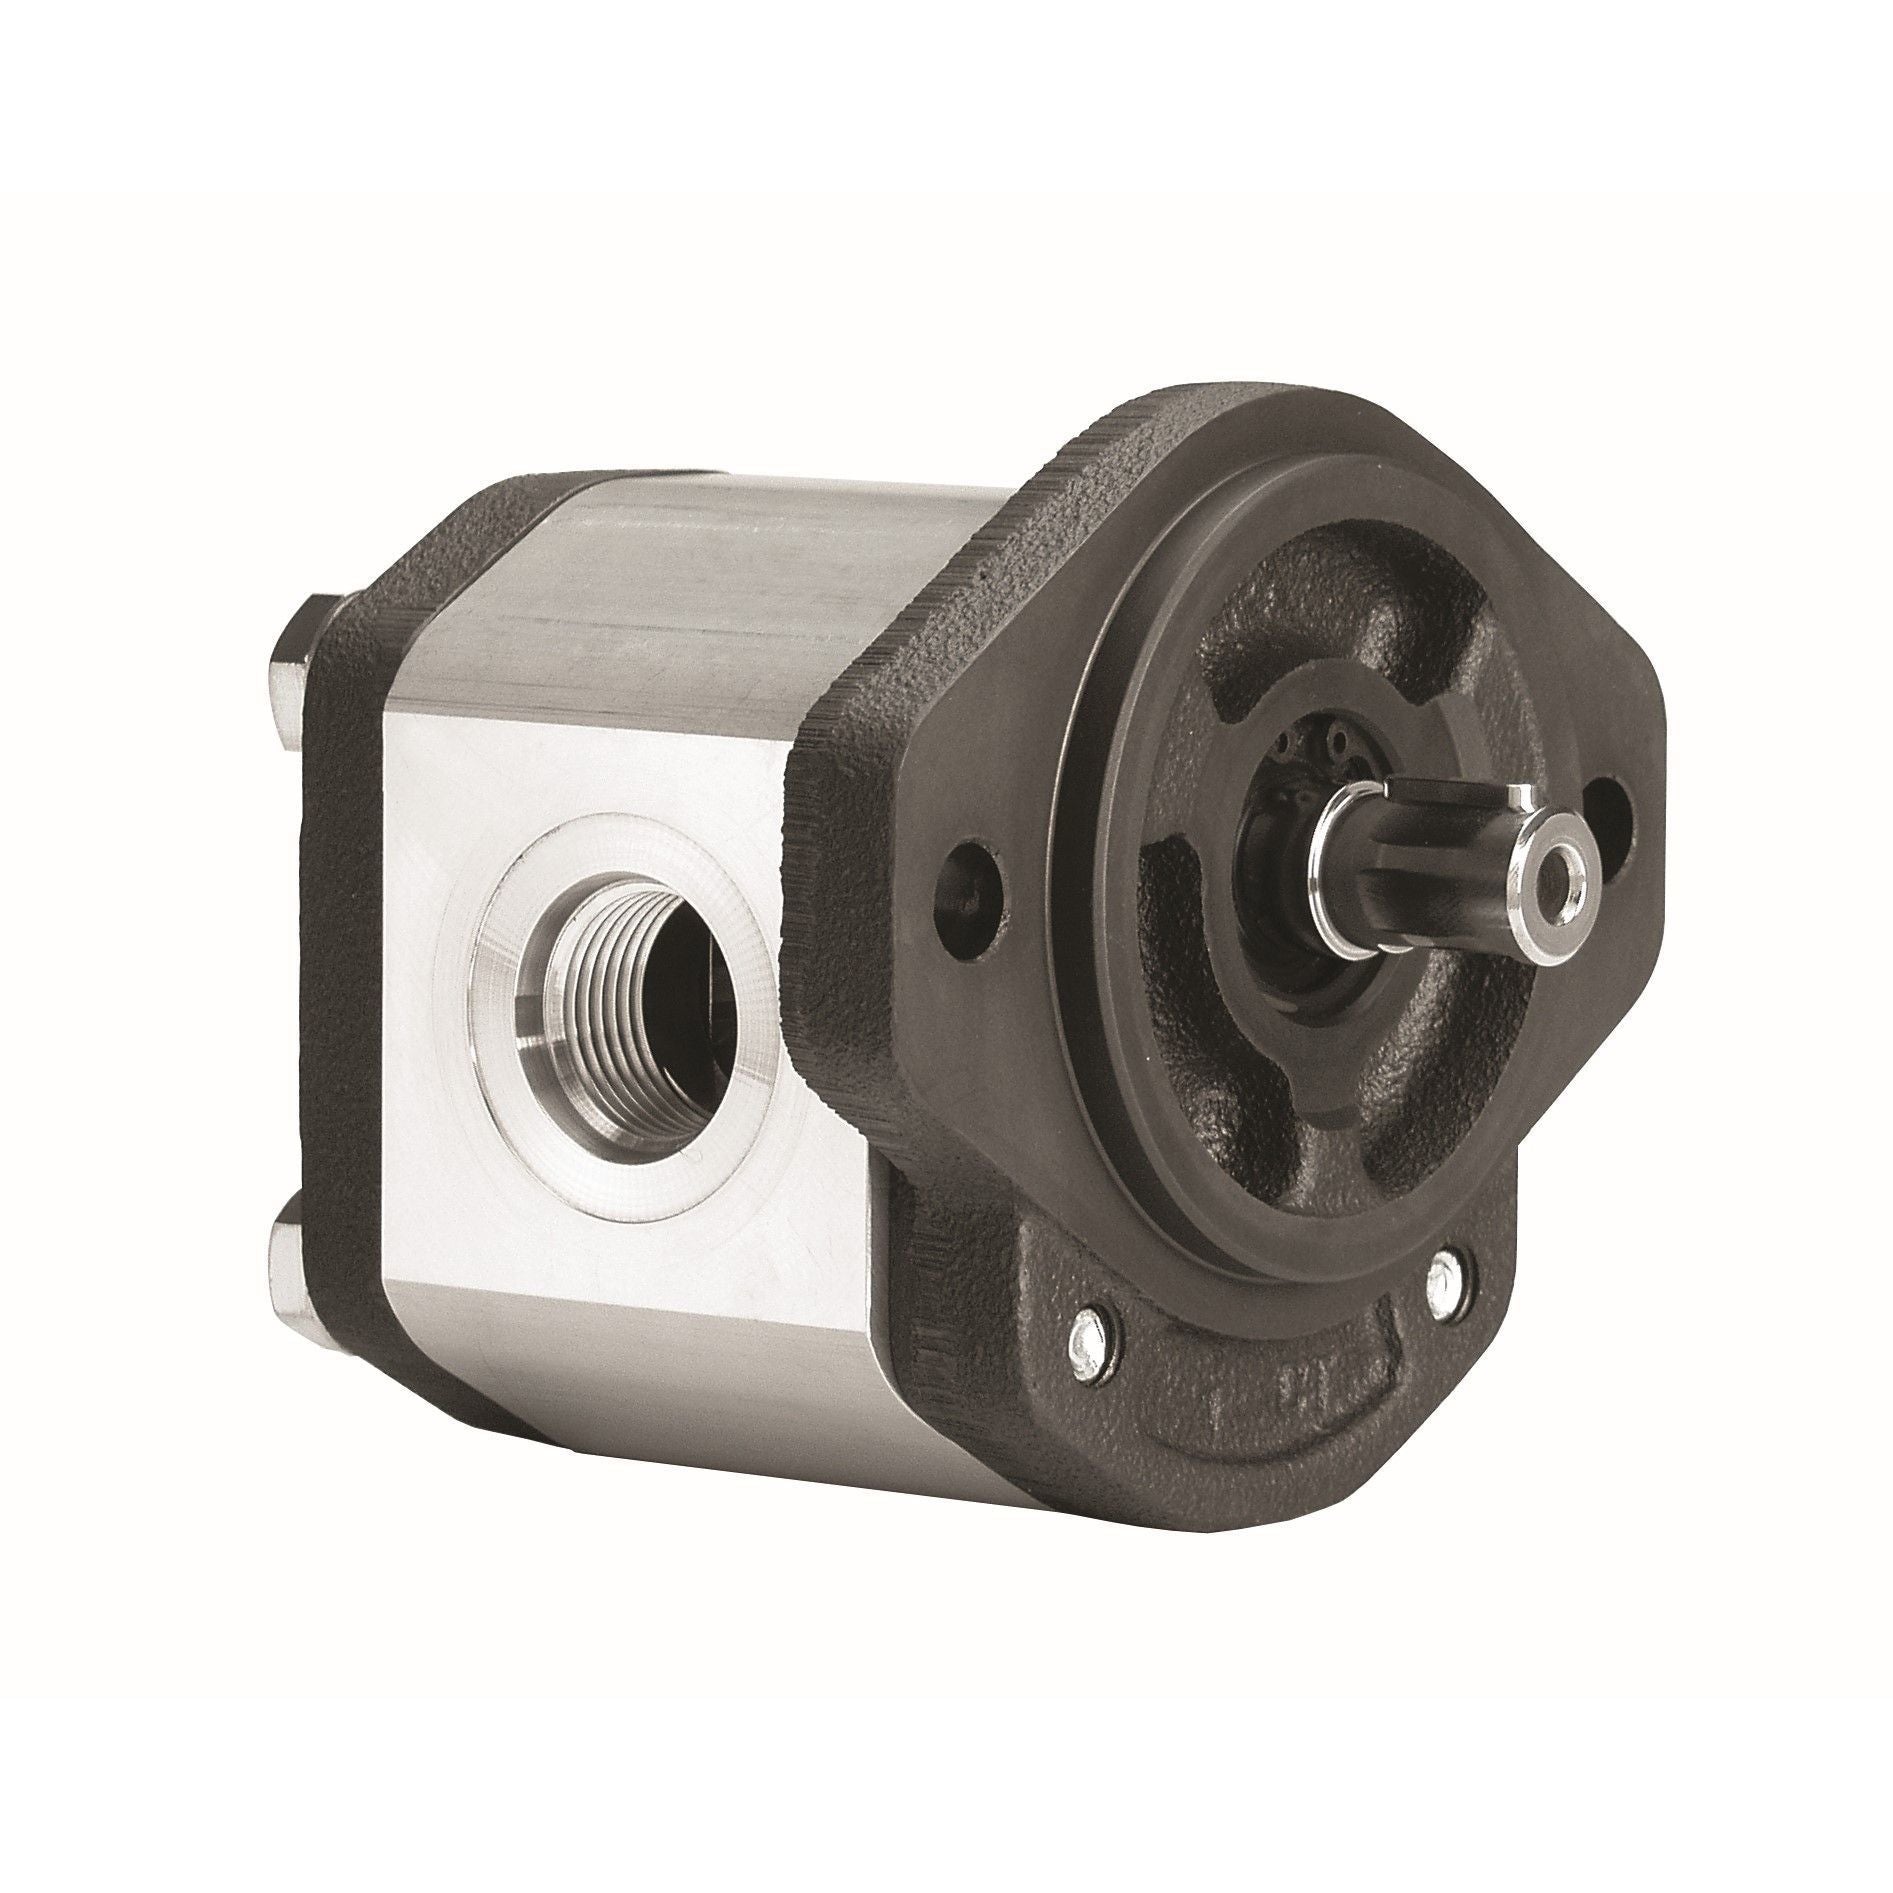 GHP2A-D-30 : Marzocchi Gear Pump, CW, 21.1cc (1.2871in3), 10.03 GPM, 3335psi, 2200 RPM, #12 SAE (3/4") In, #10 SAE (5/8") Out, Keyed Shaft 5/8" Bore x 5/32" Key, SAE A 2-Bolt Mount